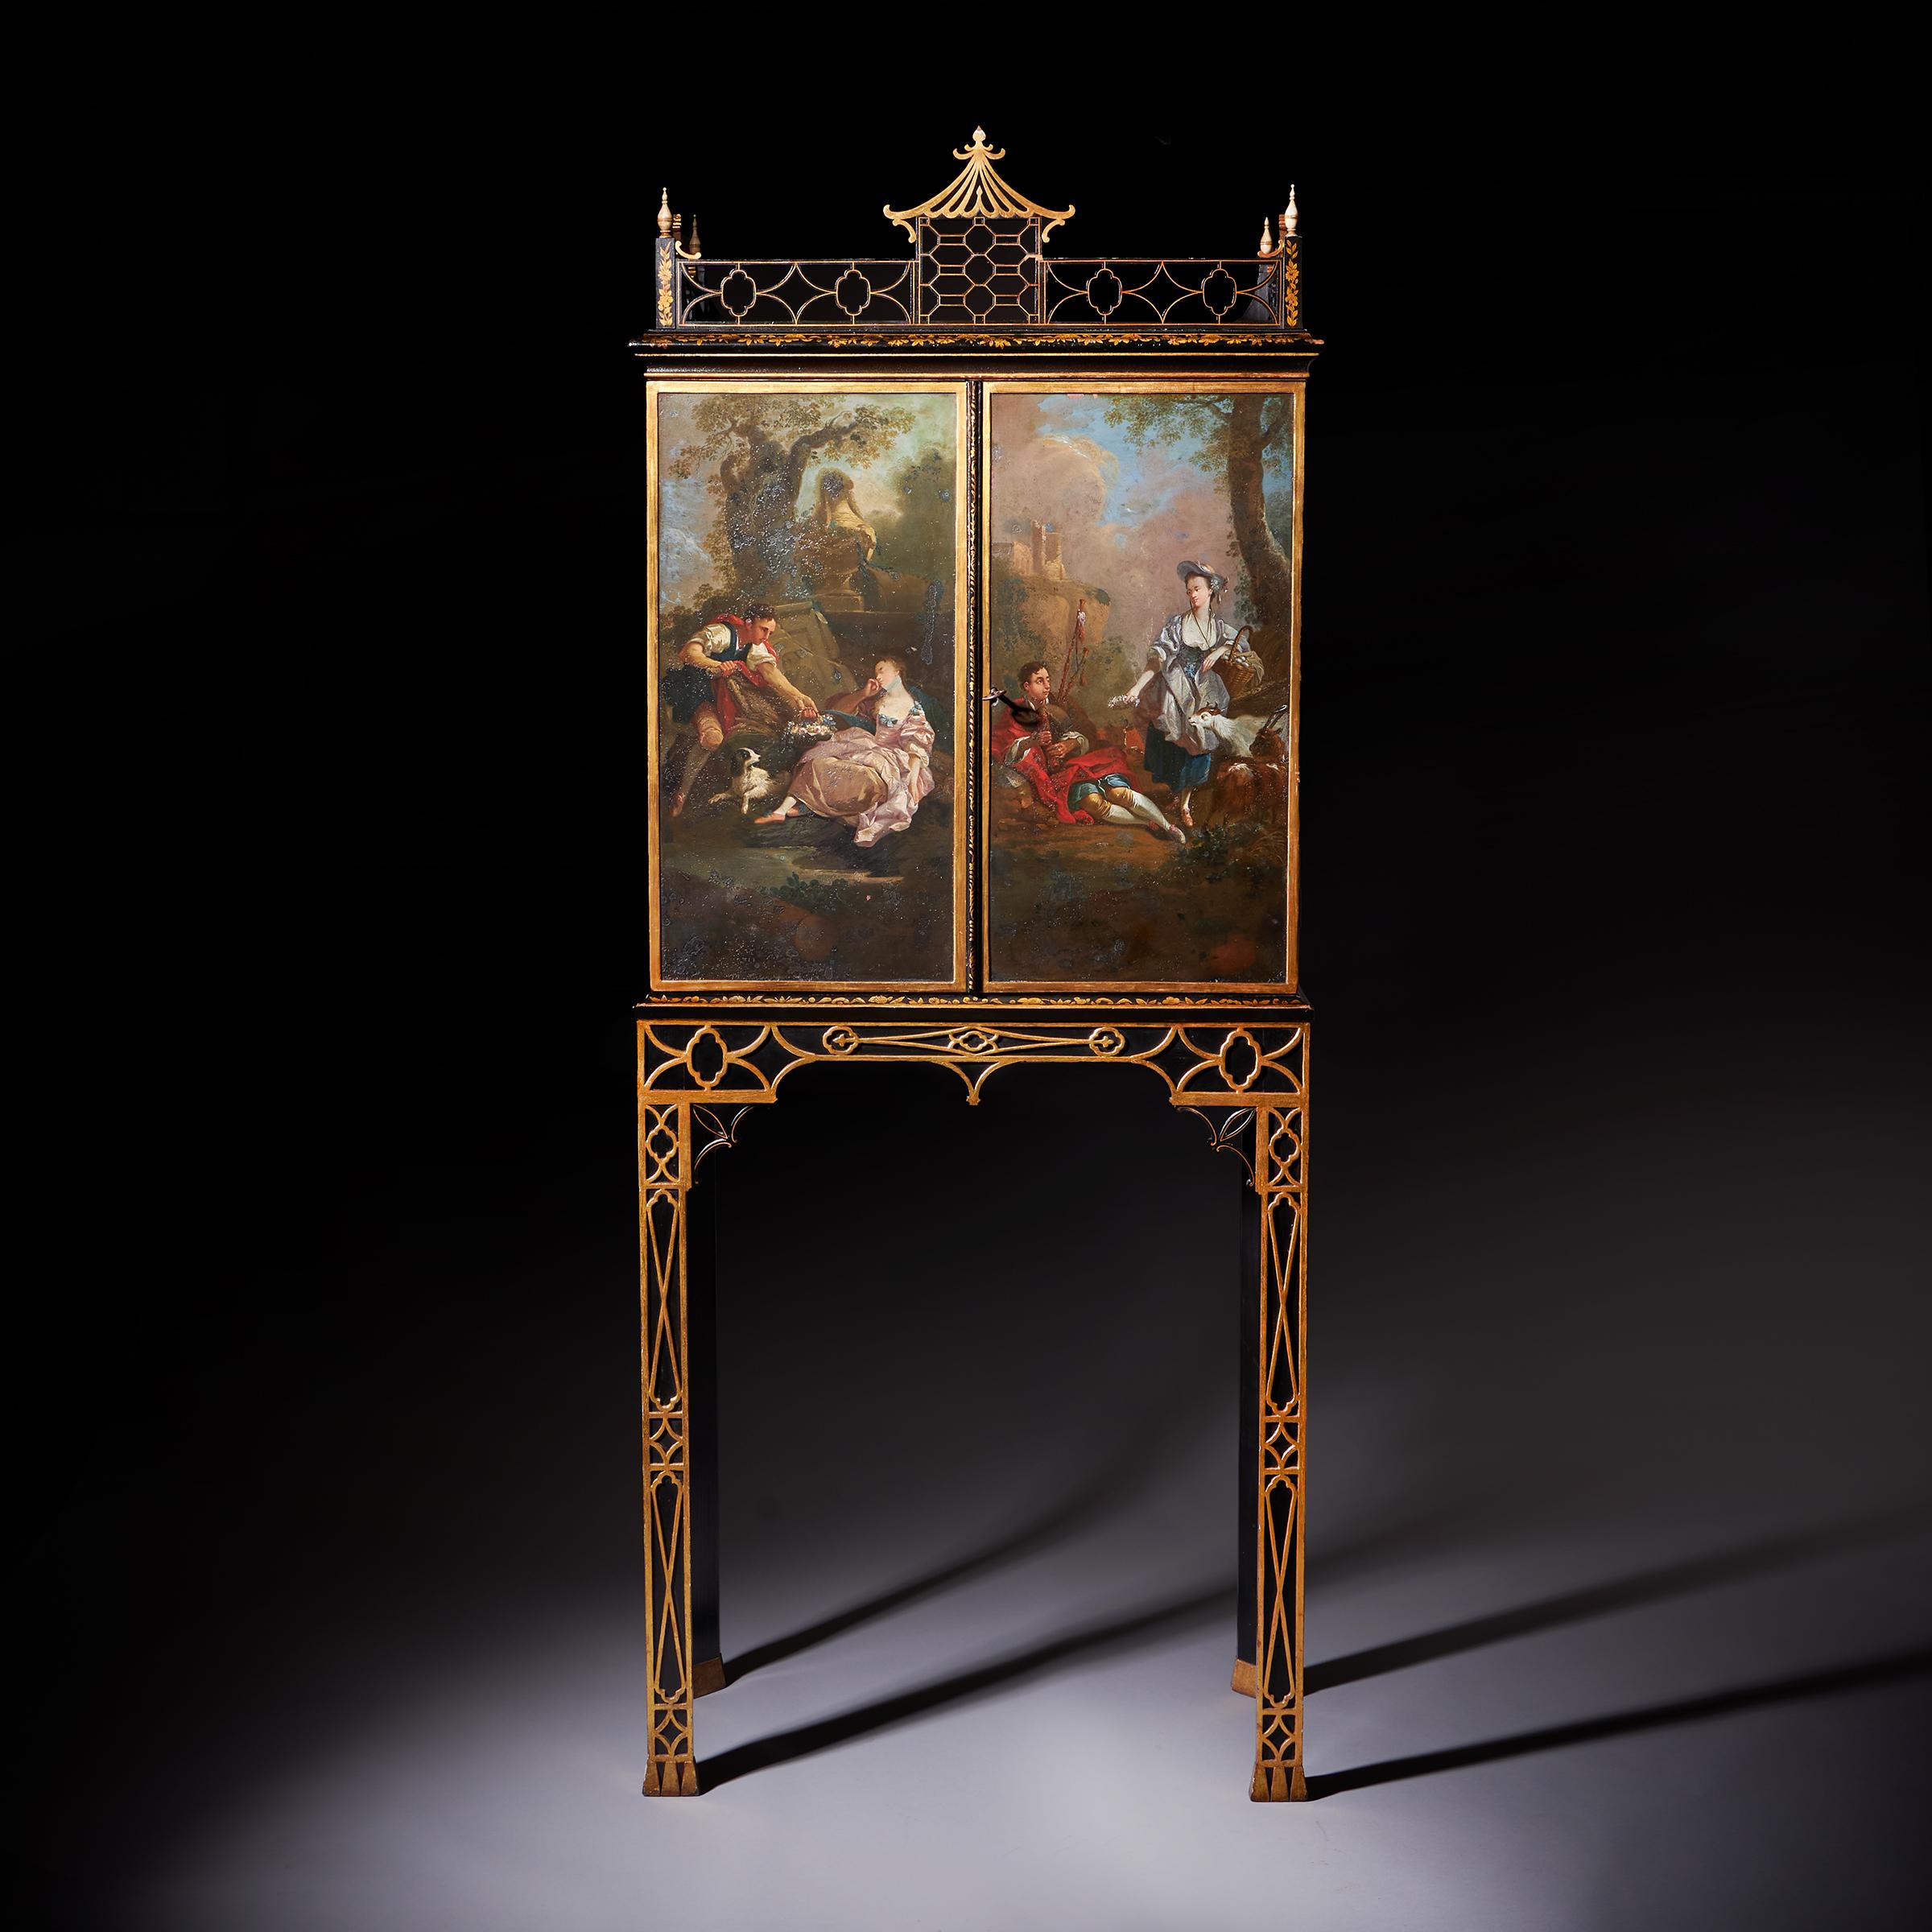 A Fine and Rare George III Chinoiserie Cabinet on Stand, Circa 1760.

A rare George III cabinet on stand in the Chinese Chippendale manner, circa 1760. England. The fret pierced ‘Pagoda’ galleried top above two cupboard doors, each painted with